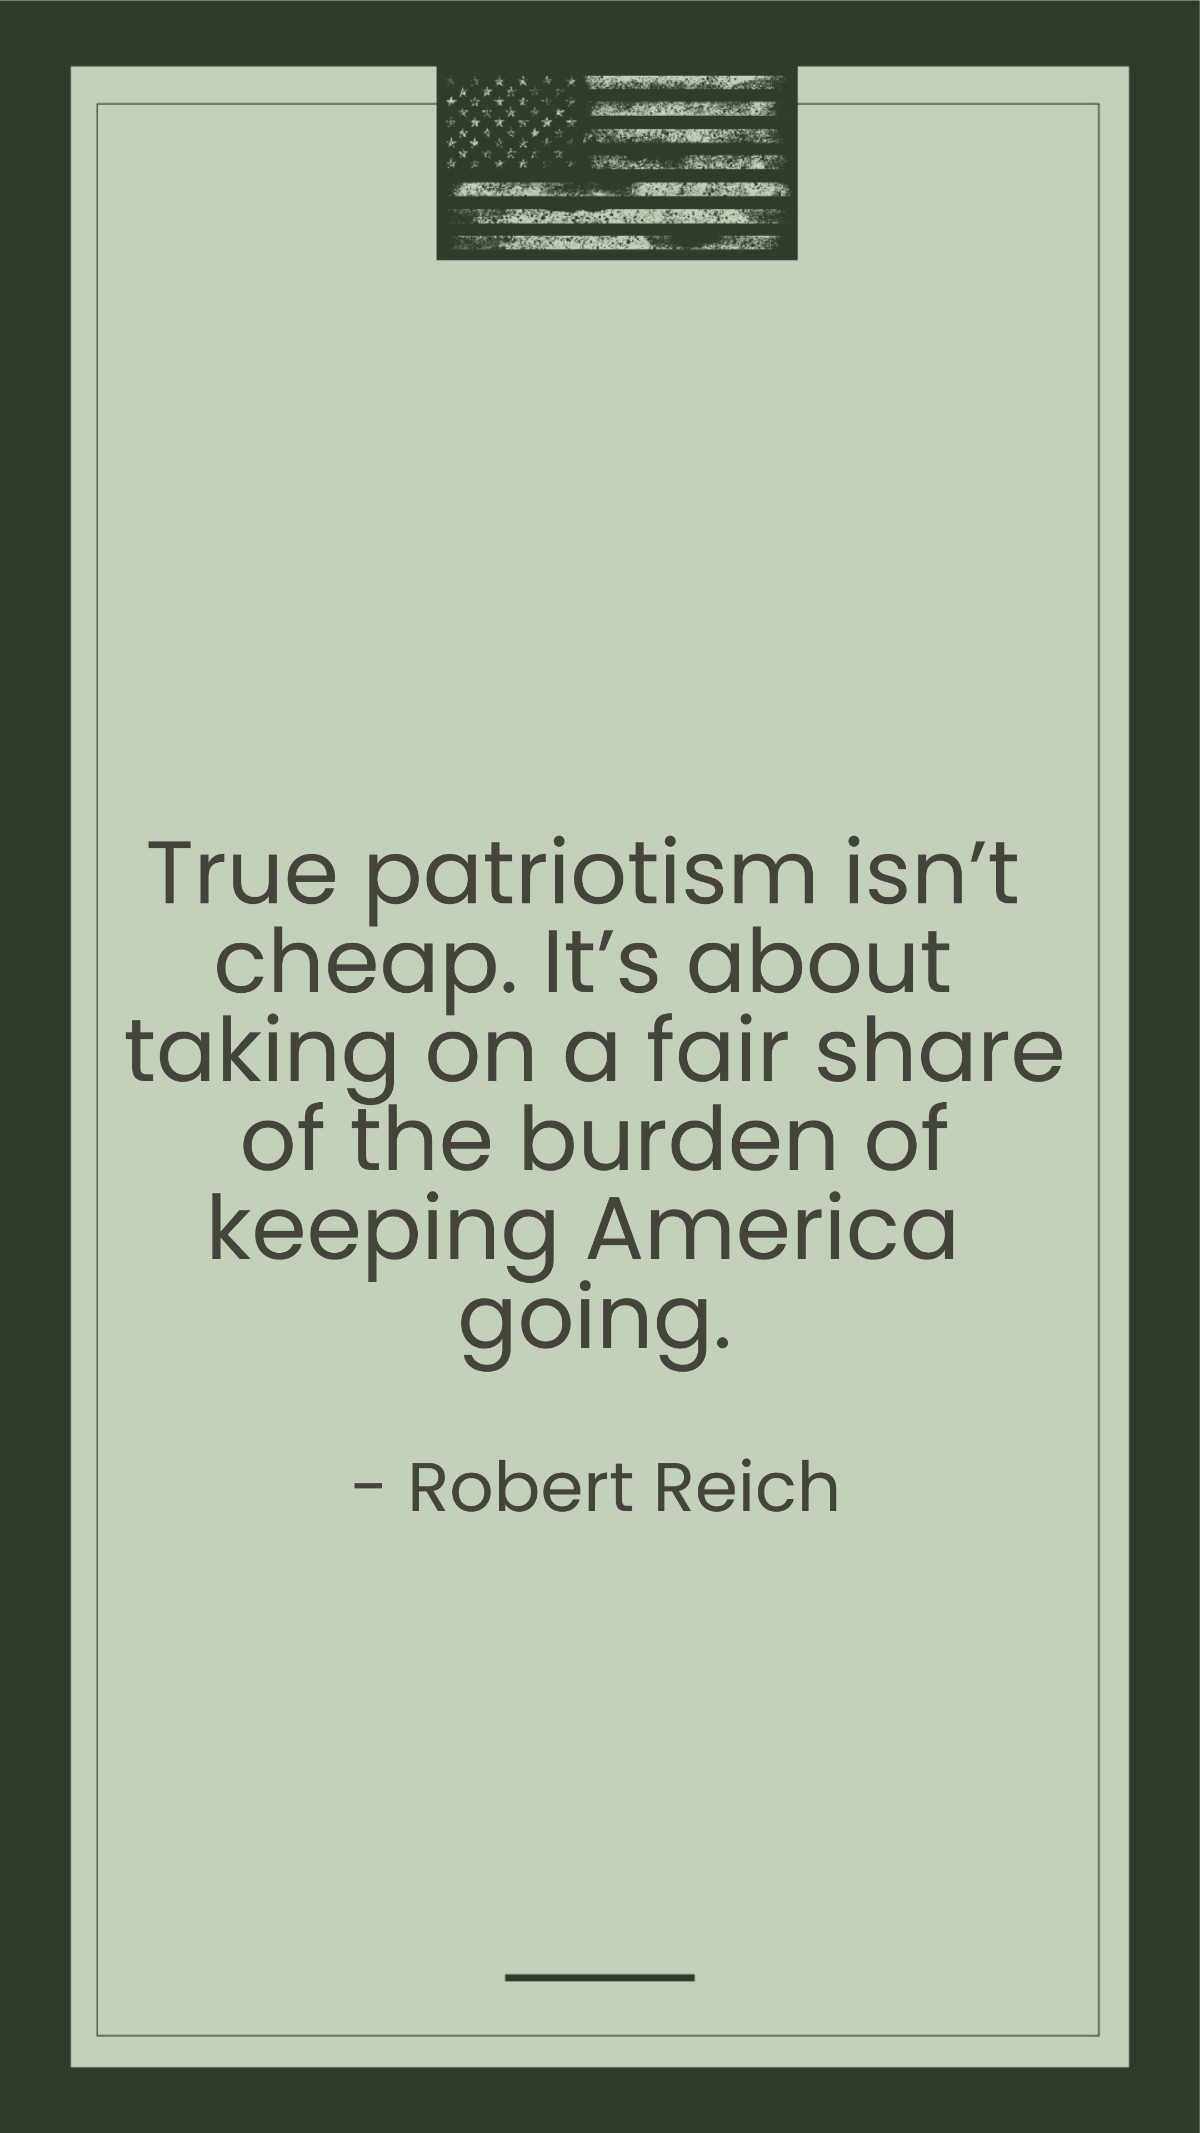 Robert Reich - True patriotism isn't cheap. It's about taking on a fair share of the burden of keeping America going.